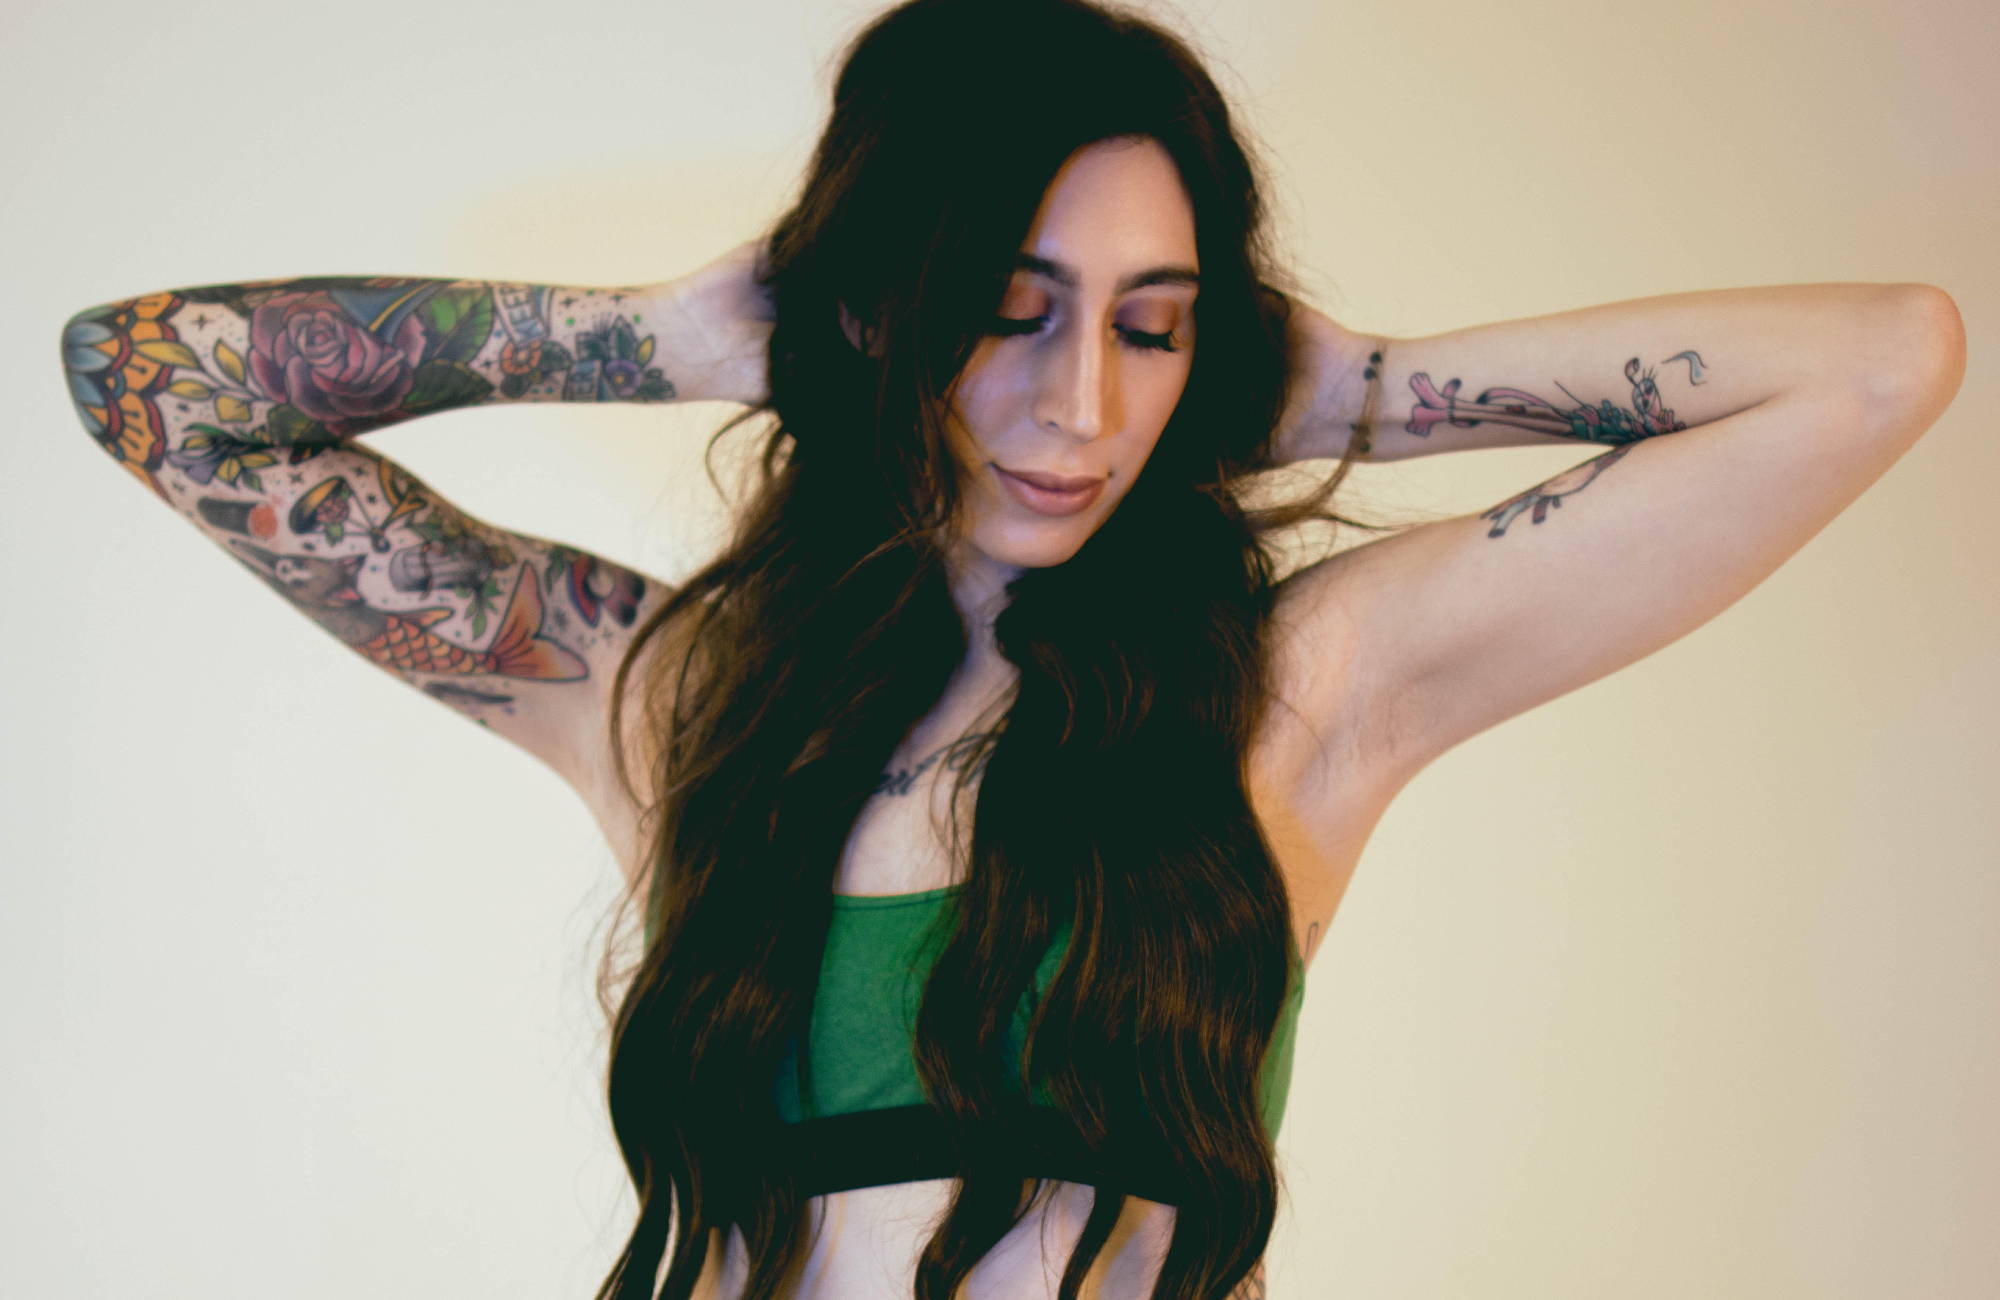 woman with long, dark hair has her hands on her head and looks down while wearing a green bralette